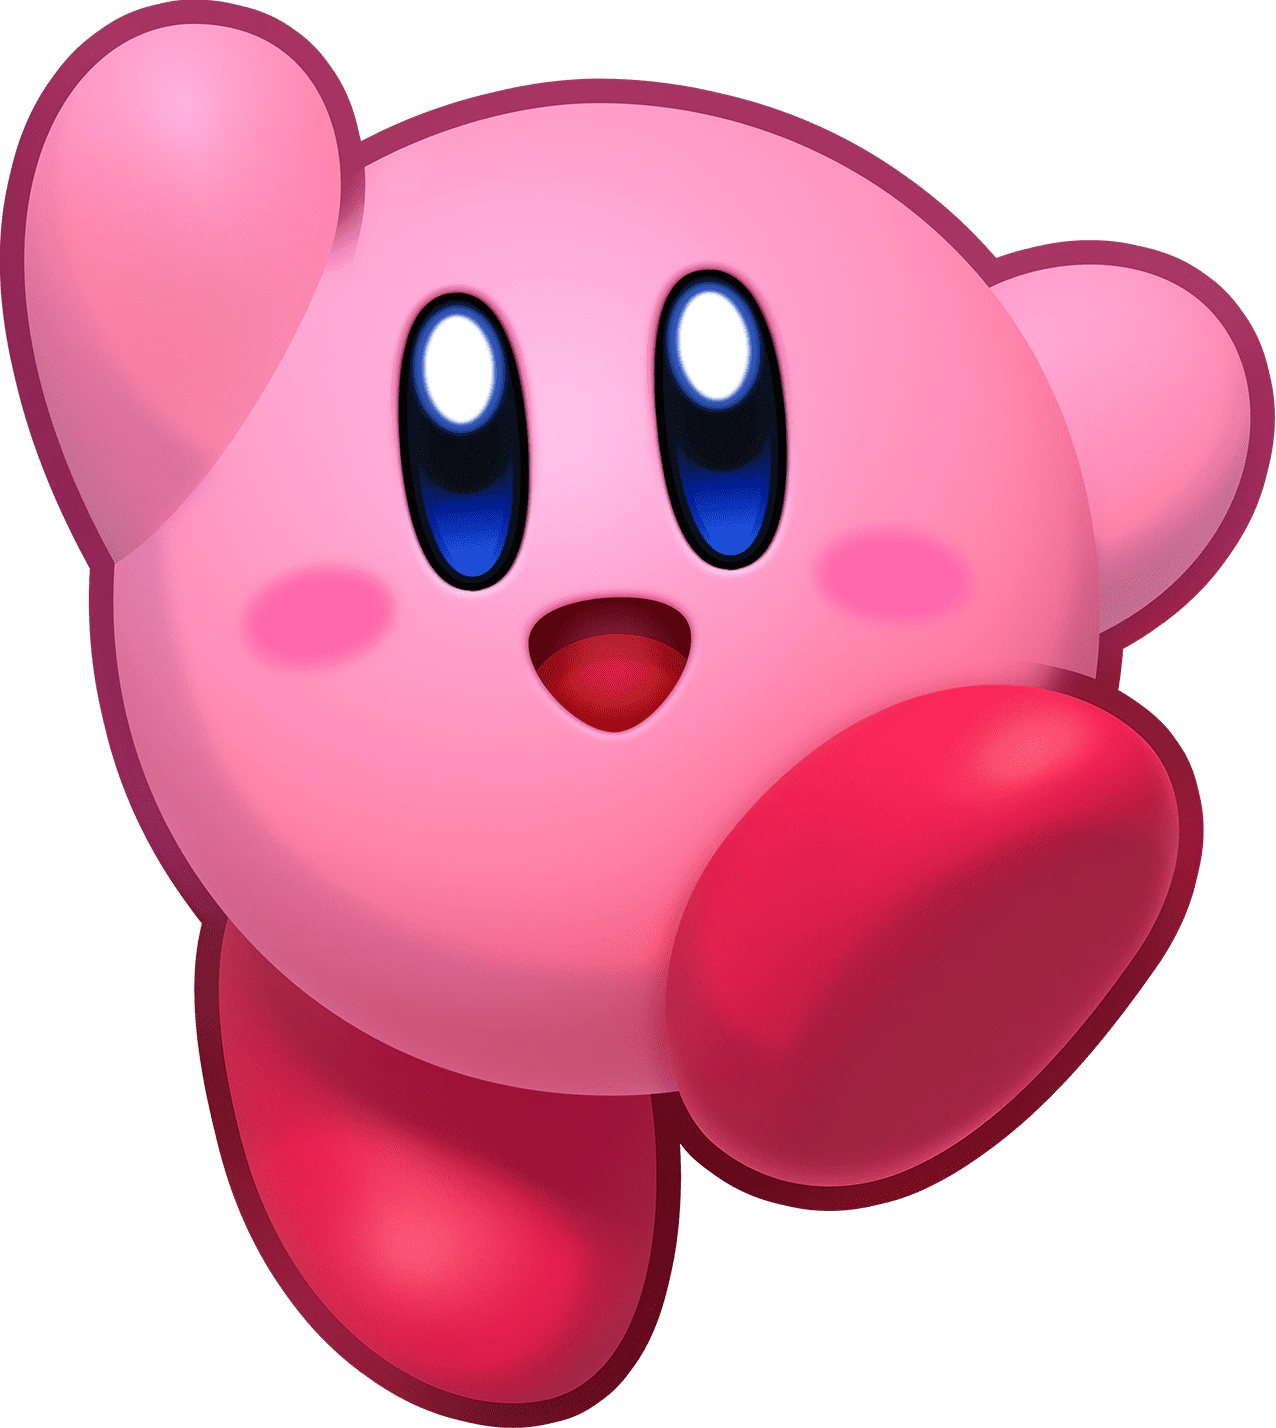 Kirby: 10 Most Adorable Enemies From The Series